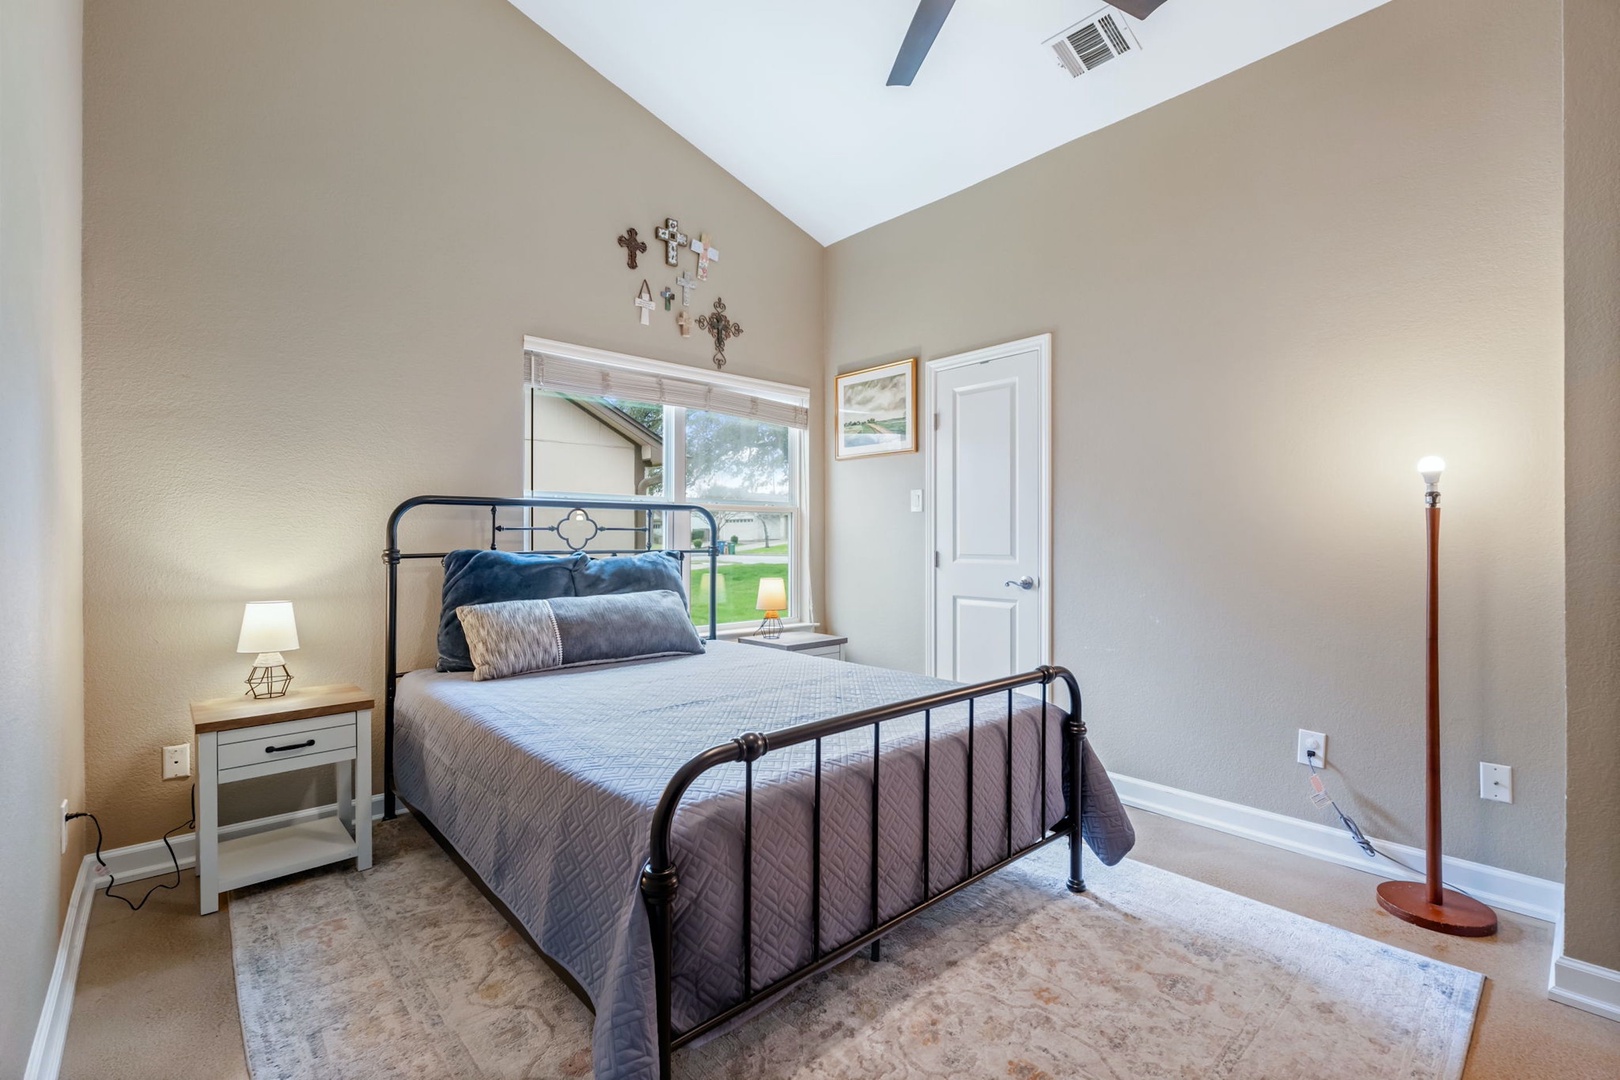 The first bedroom includes a plush queen-sized bed & Smart TV